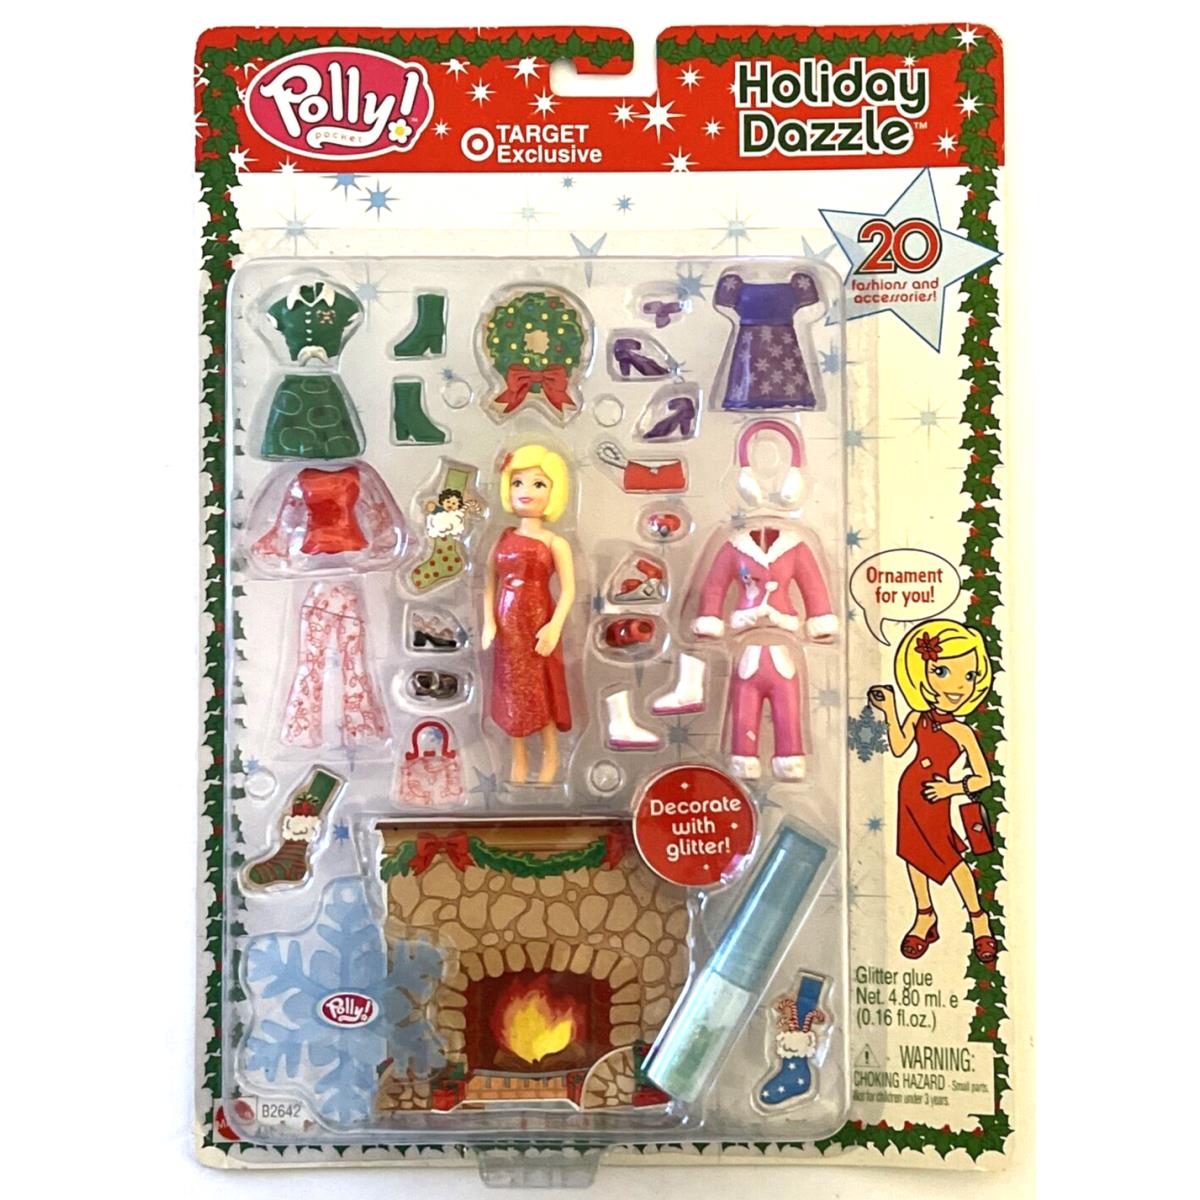 Toy - Polly Pocket Holiday Dazzle Set 2003 Target Exclusive